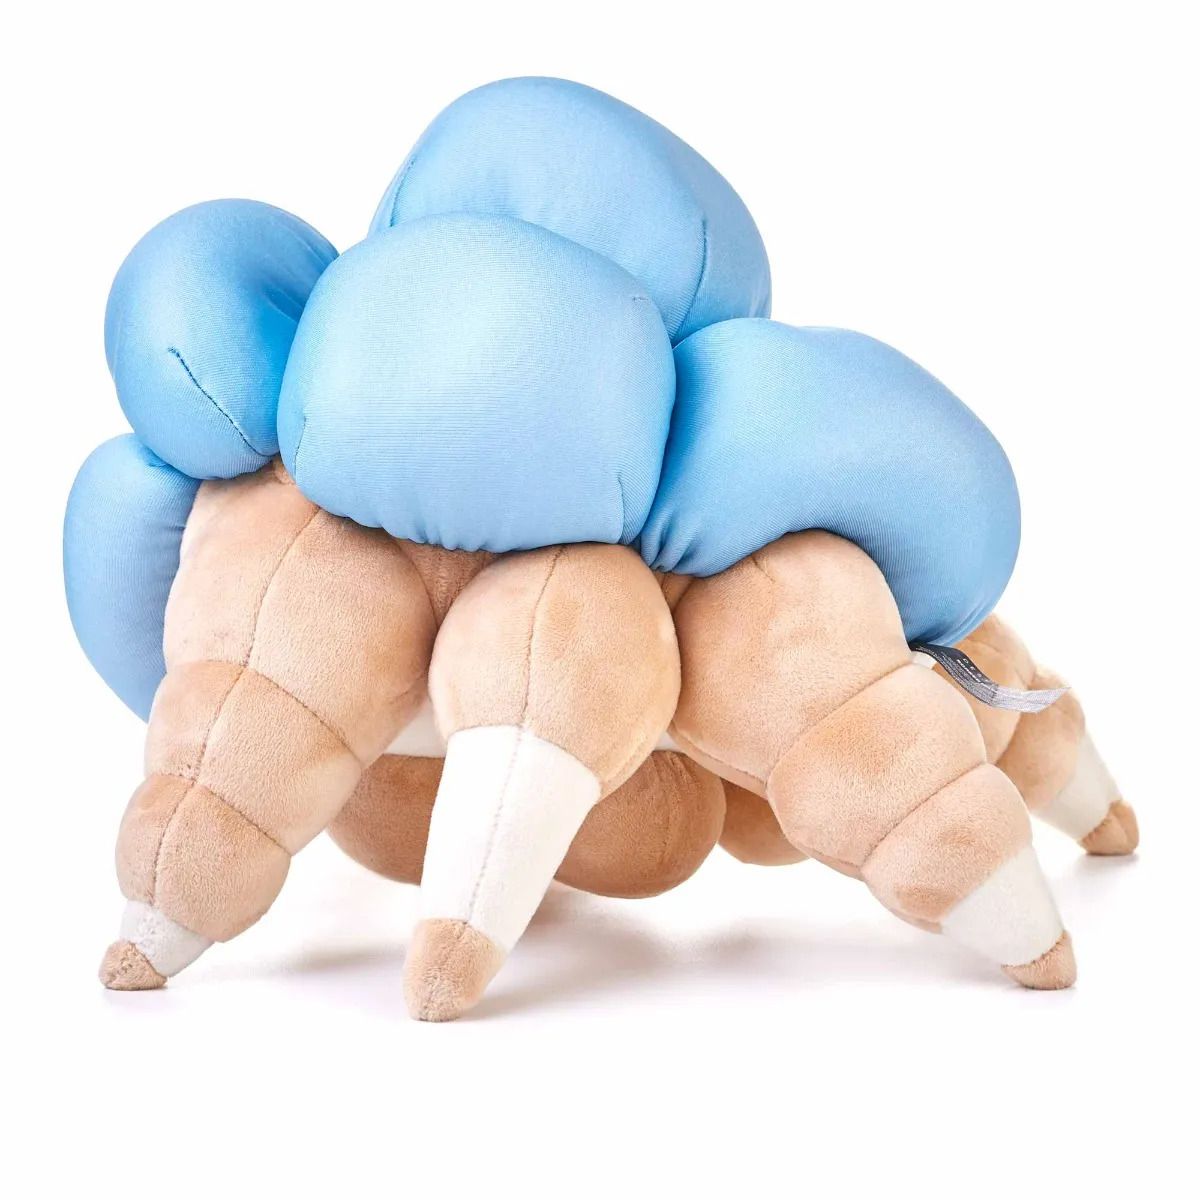 A Screeb plush from Destiny 2 standing to the side. It’s tan, stands on 6 legs, and is covered in blue pustules